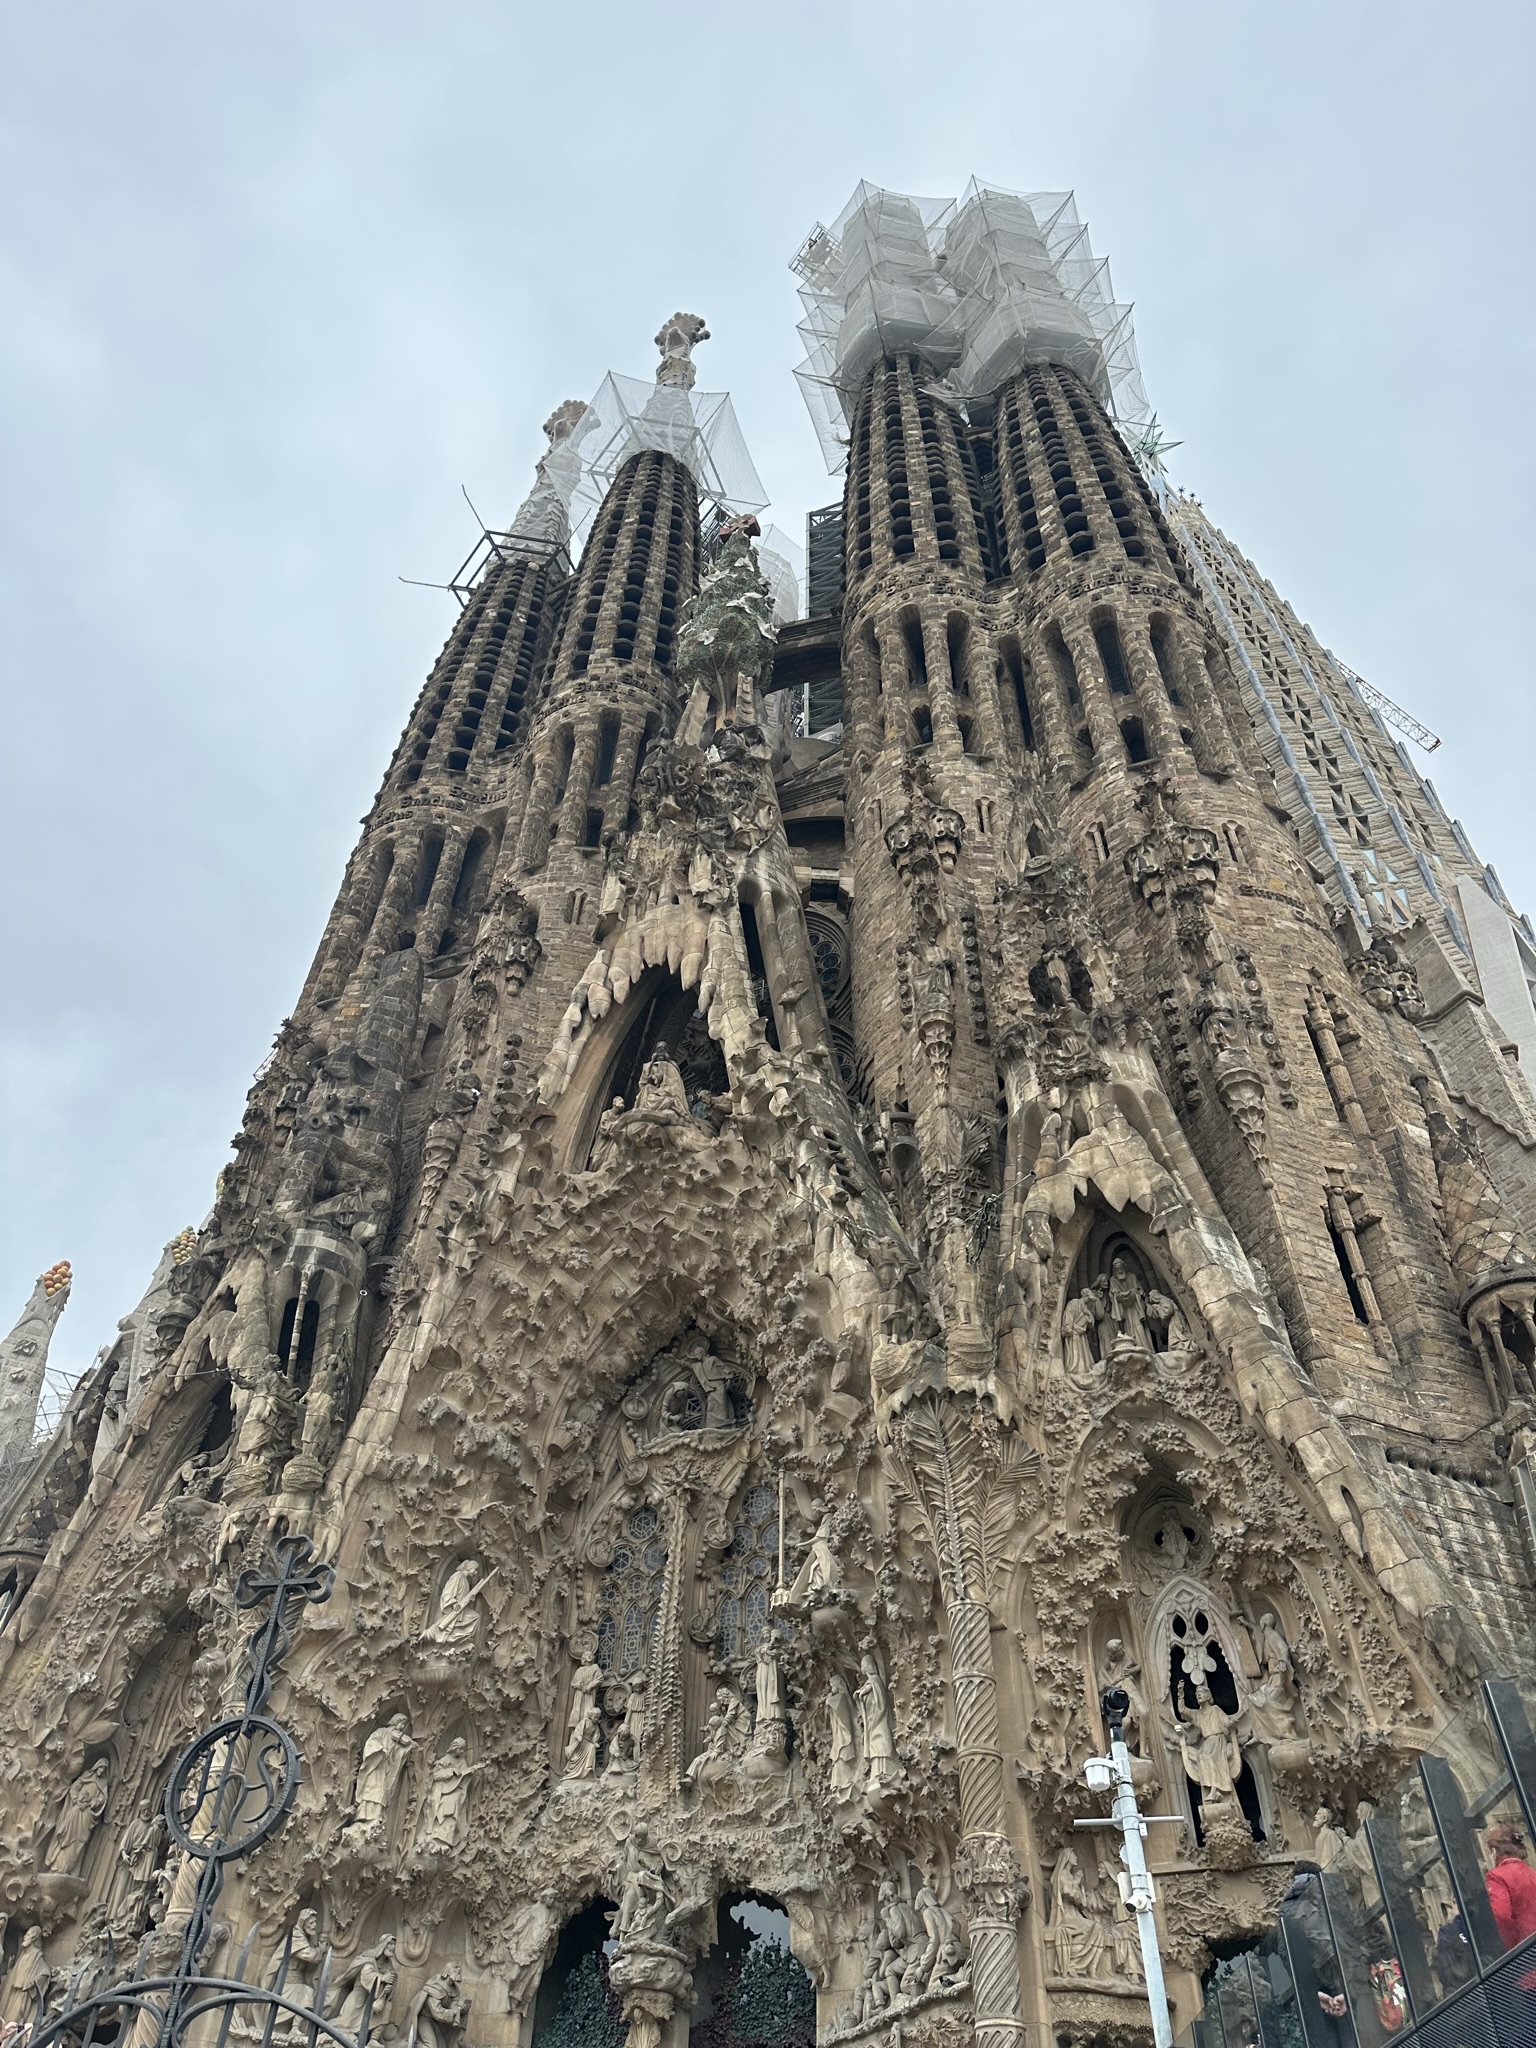 Another Gaudí masterpiece. The massive basilica's construction started on 1882 and is not finished to this day.